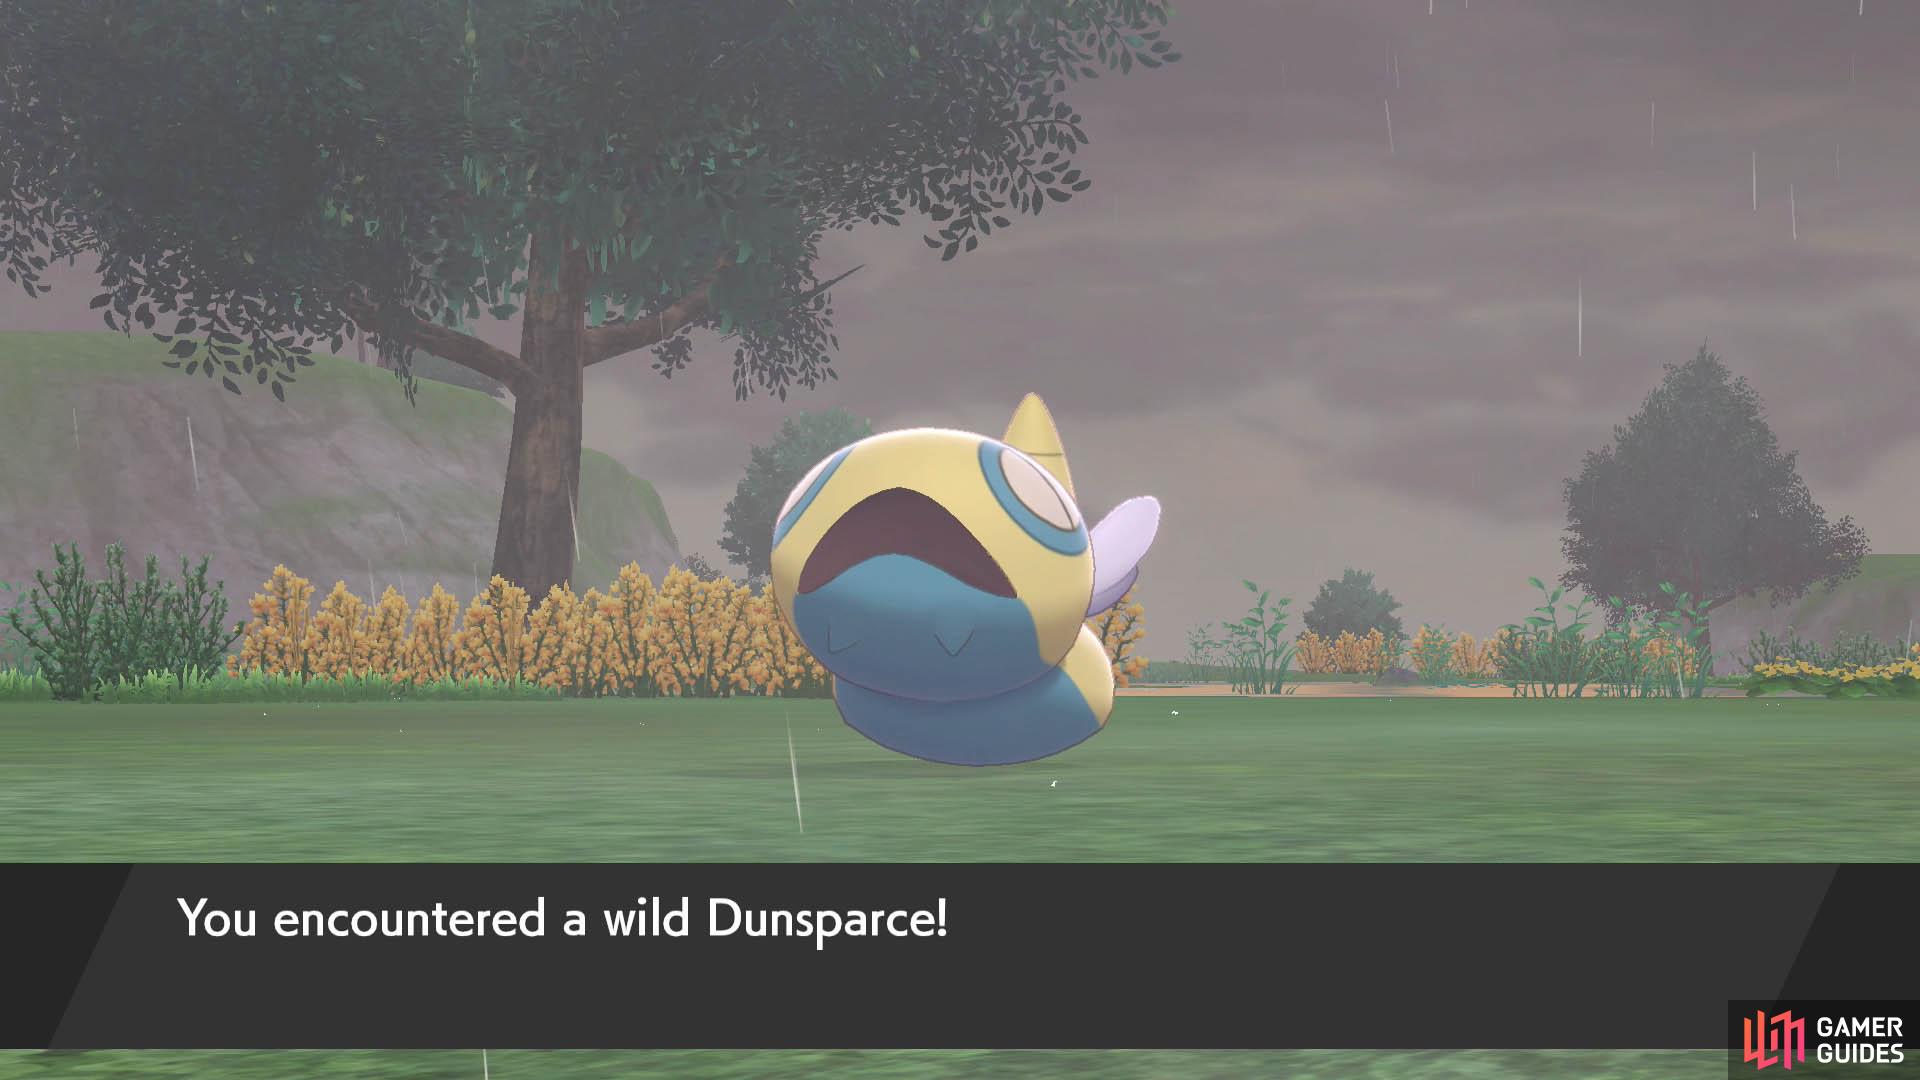 Dunsparce can be found on the overworld as well, but it's rarer and liable to flee when agitated.